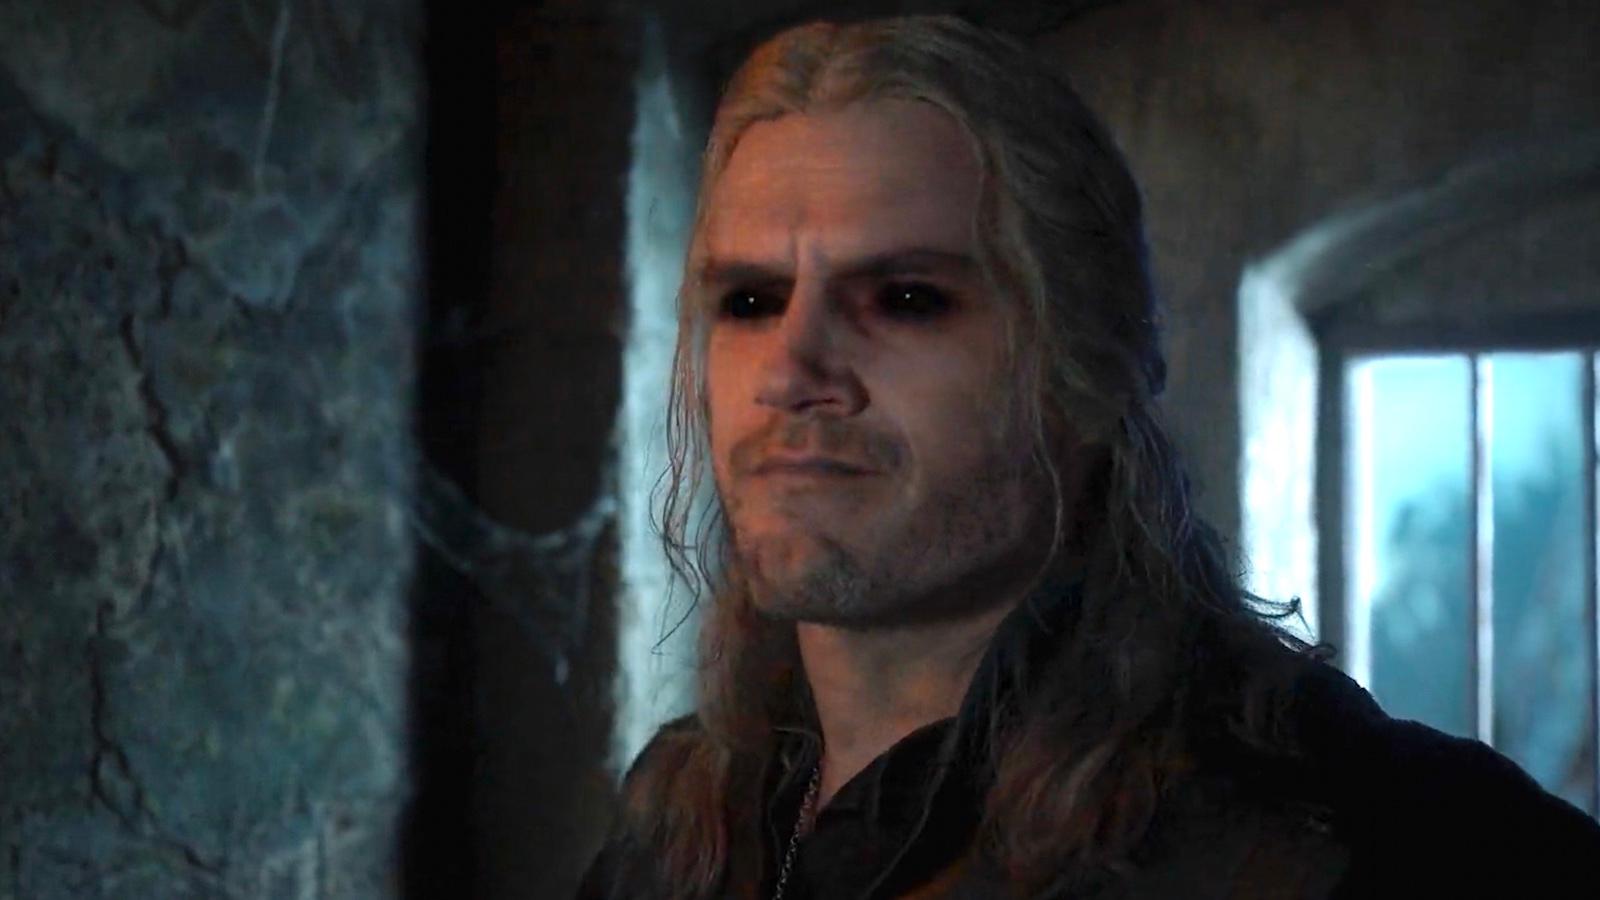 Henry Cavill in The Witcher on Netflix